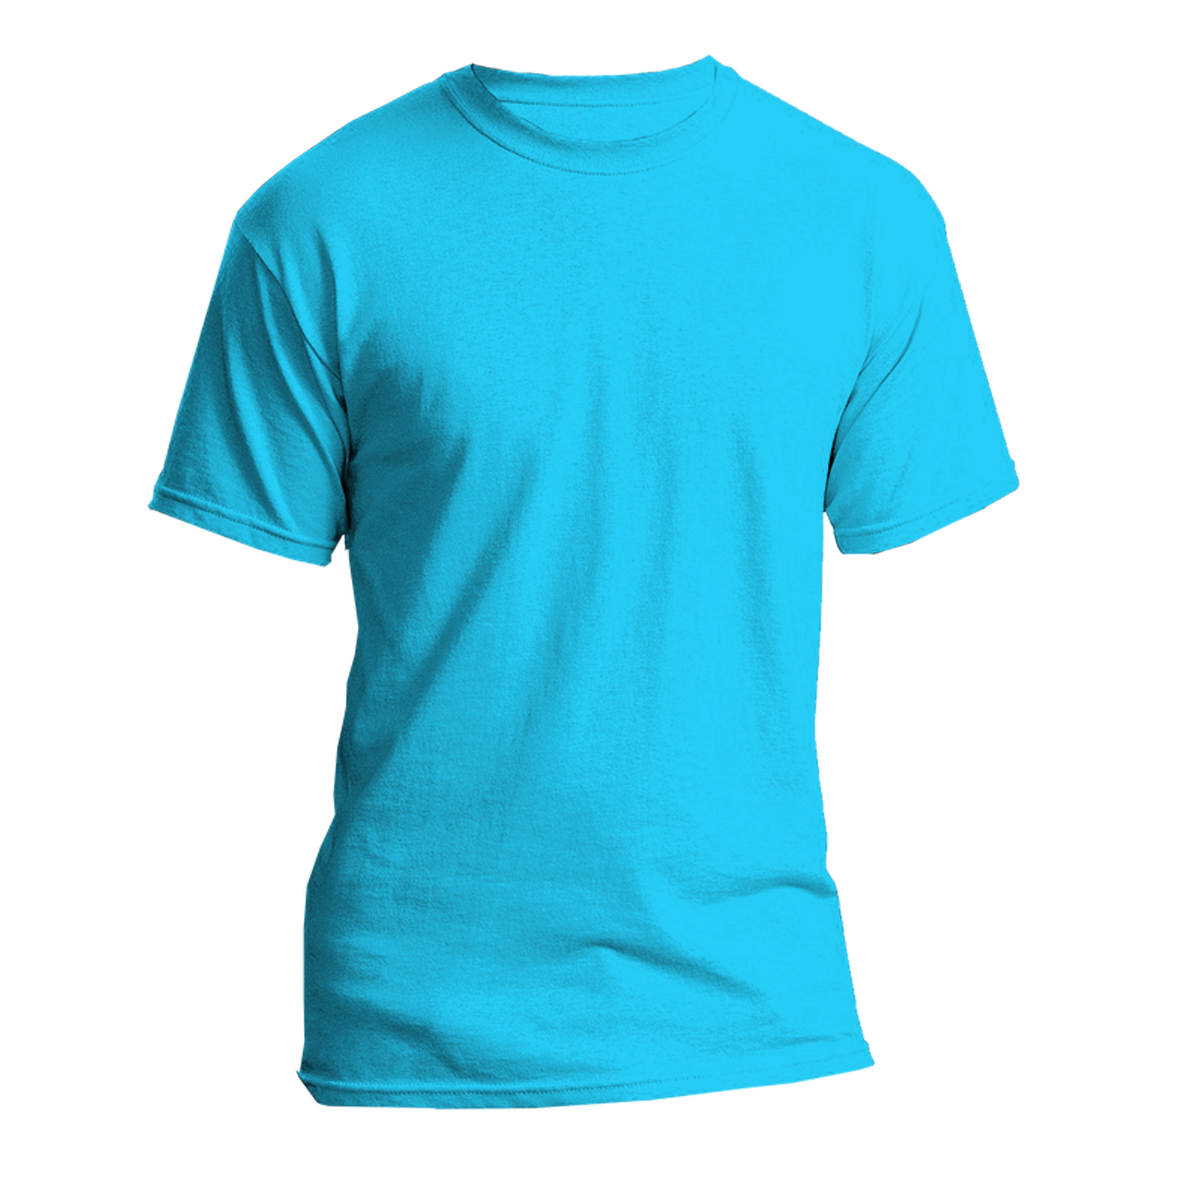 Teal Blue Round Neck Tshirt - 100% Cotton Available in Nairobi